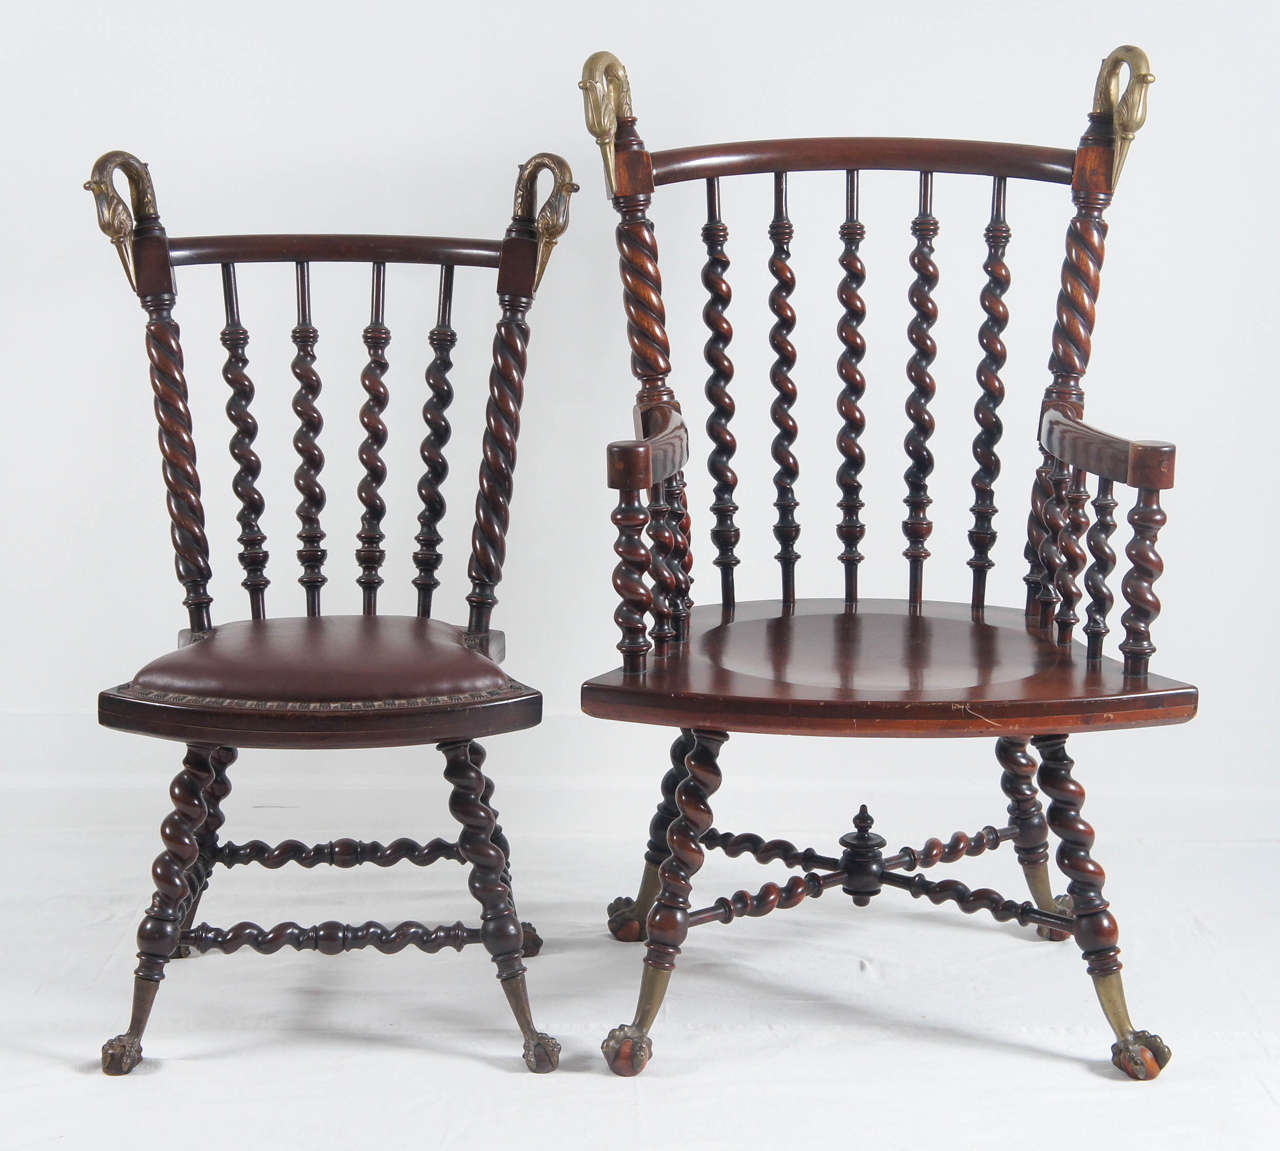 a great pair of antique chairs.
His and hers Victorian era spindle chairs.
They are heavy, made from mahogany.
There is age and wear to these old chairs.
They are strong well made chairs that present very well.
Sold as a set.